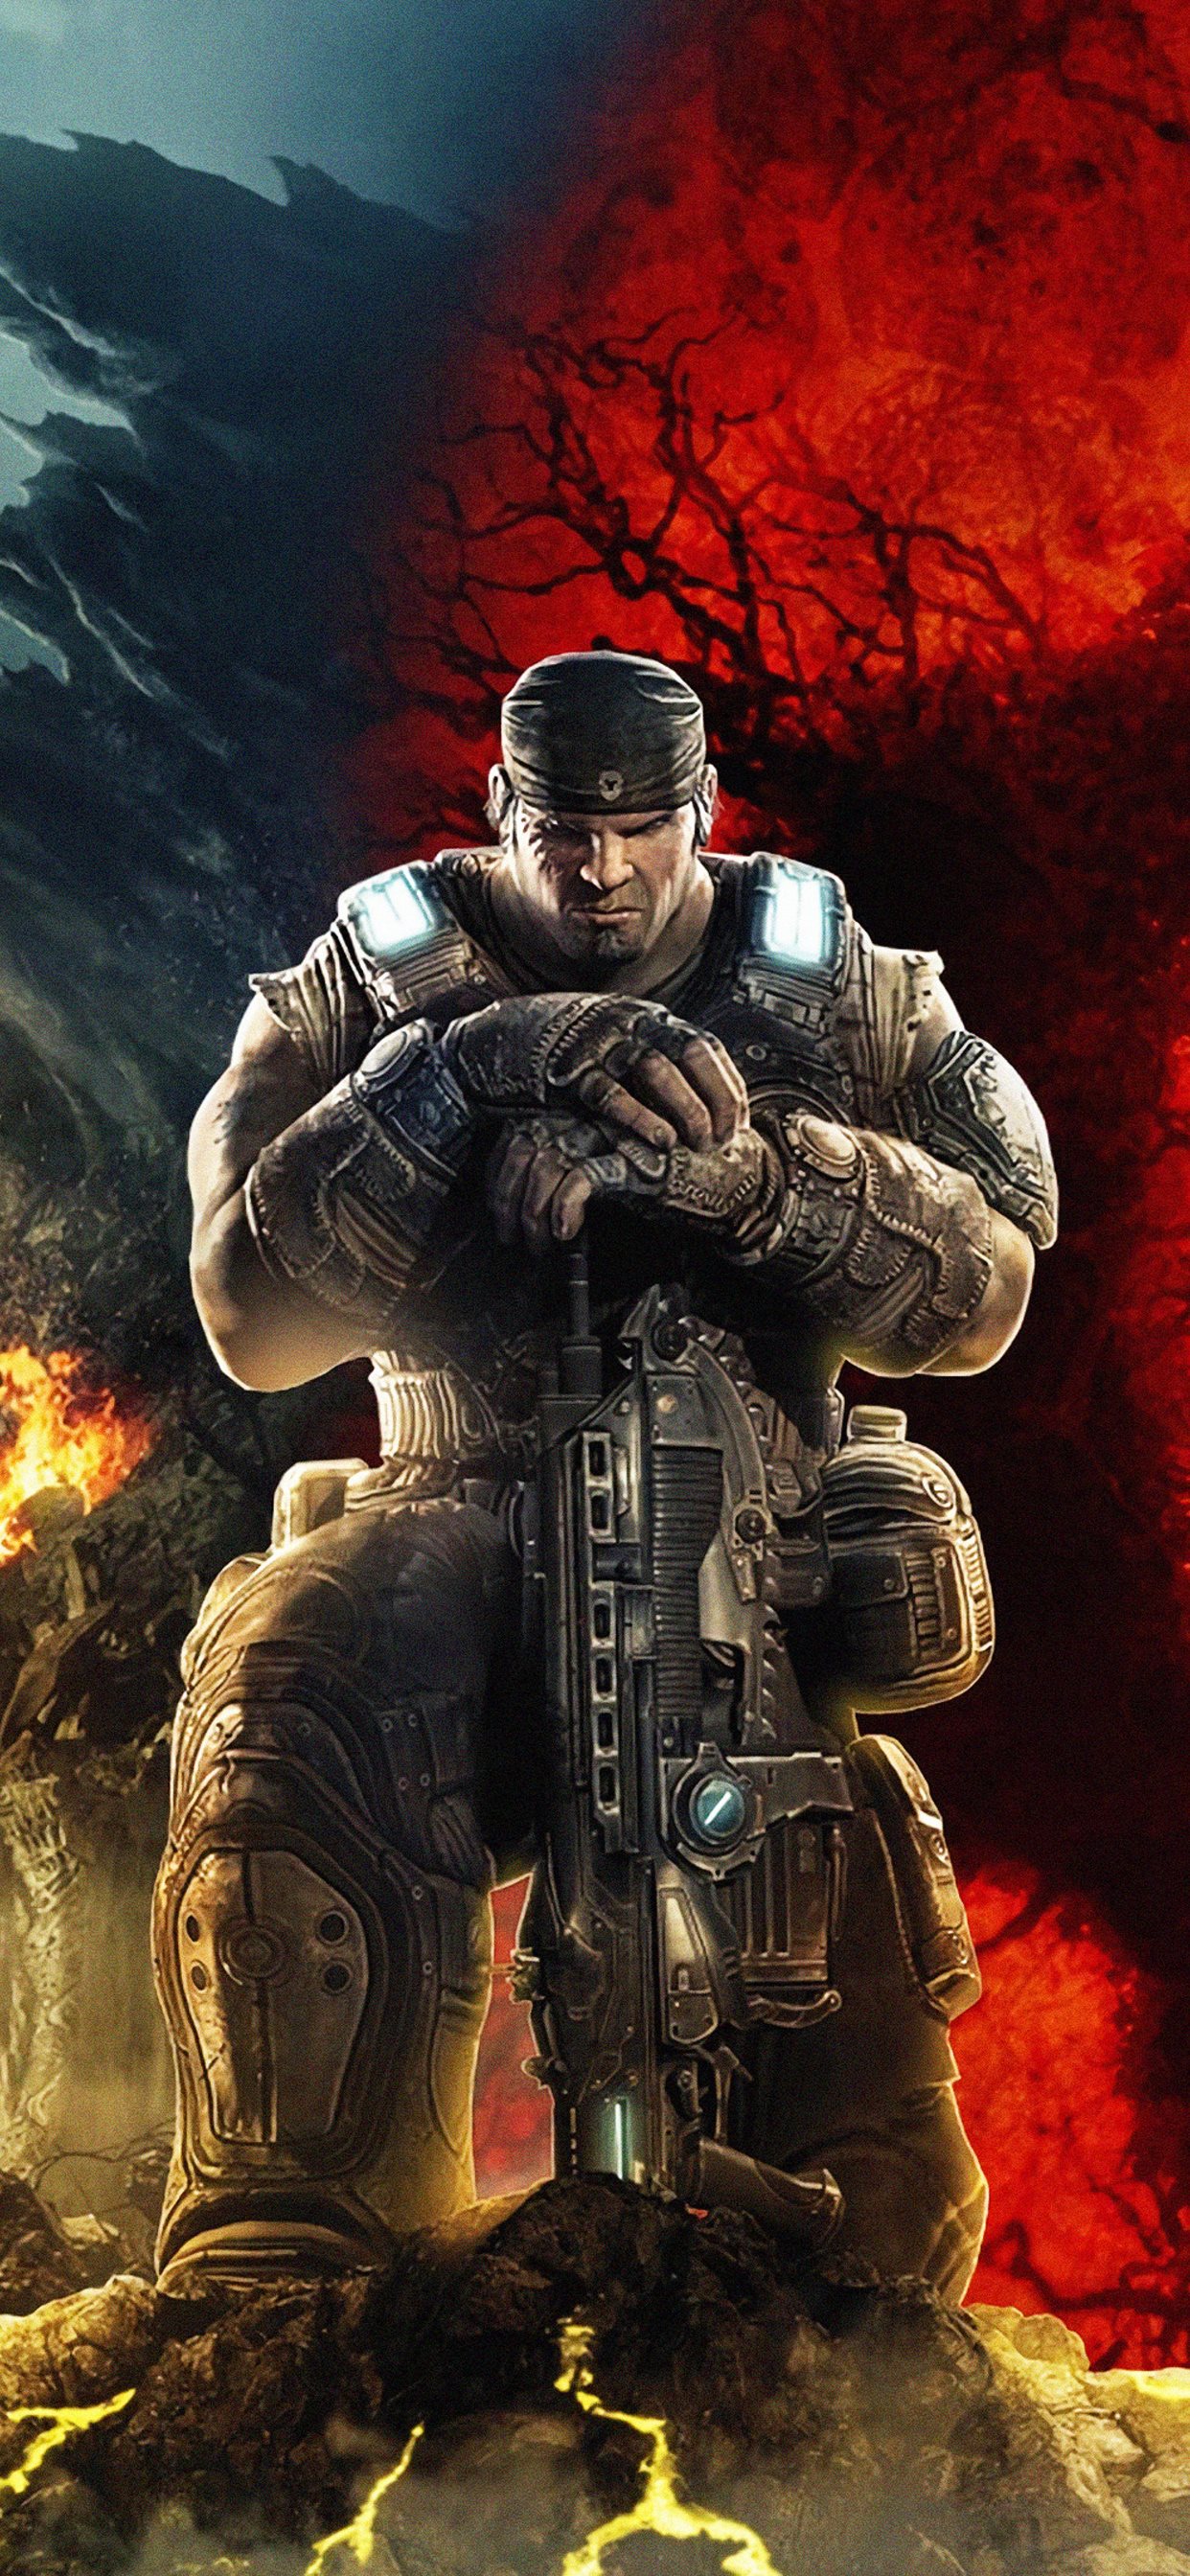 Iphone Xs Gears Of War 5 Backgrounds